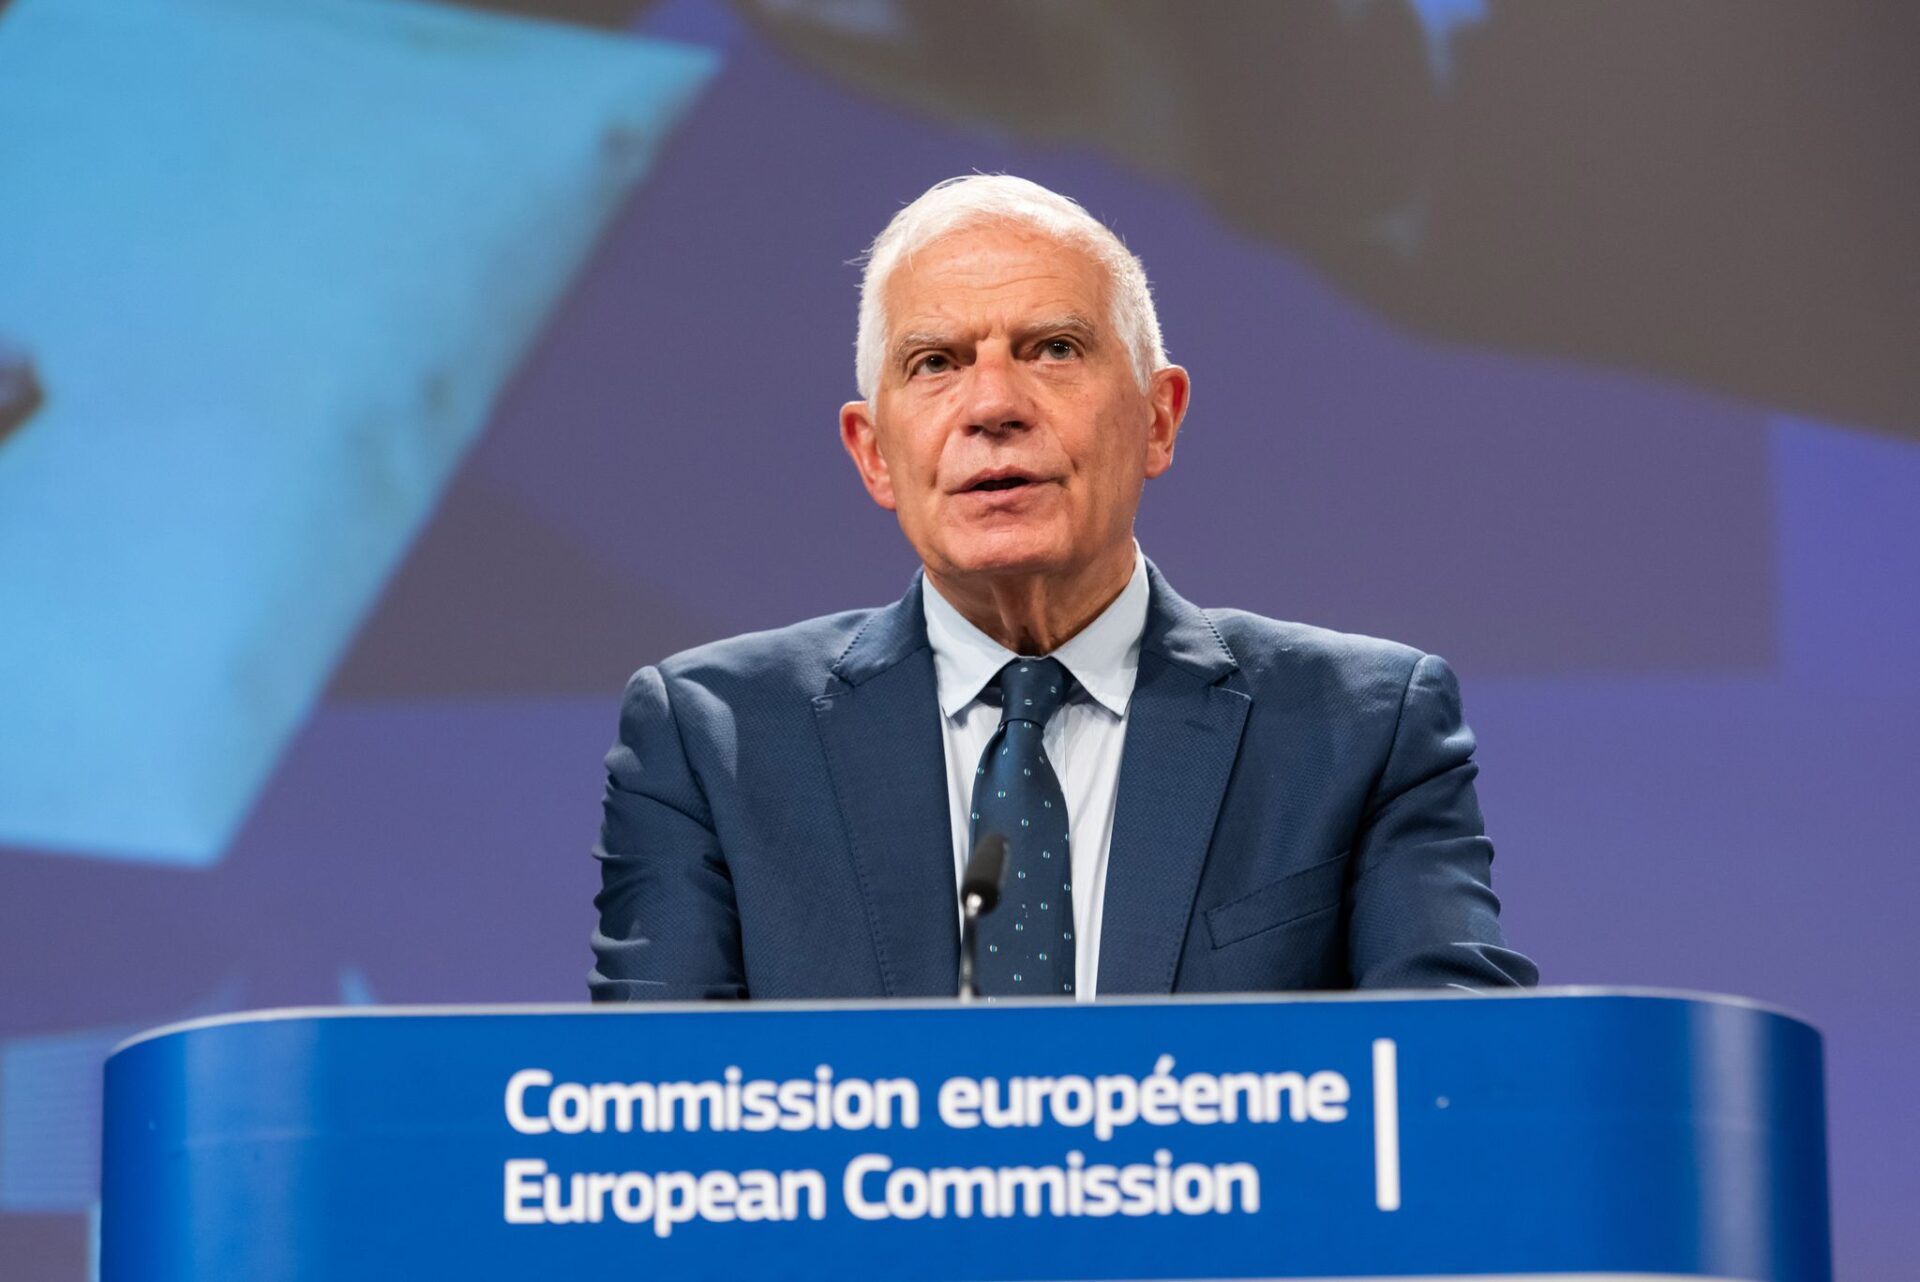 Josep Borrell, EU High Representative for Foreign Affairs and Security Policy, speaks during a press conference. Borrell, has spoken out against an attack on police in Kosovo on Sunday which left one officer dead and two injured.